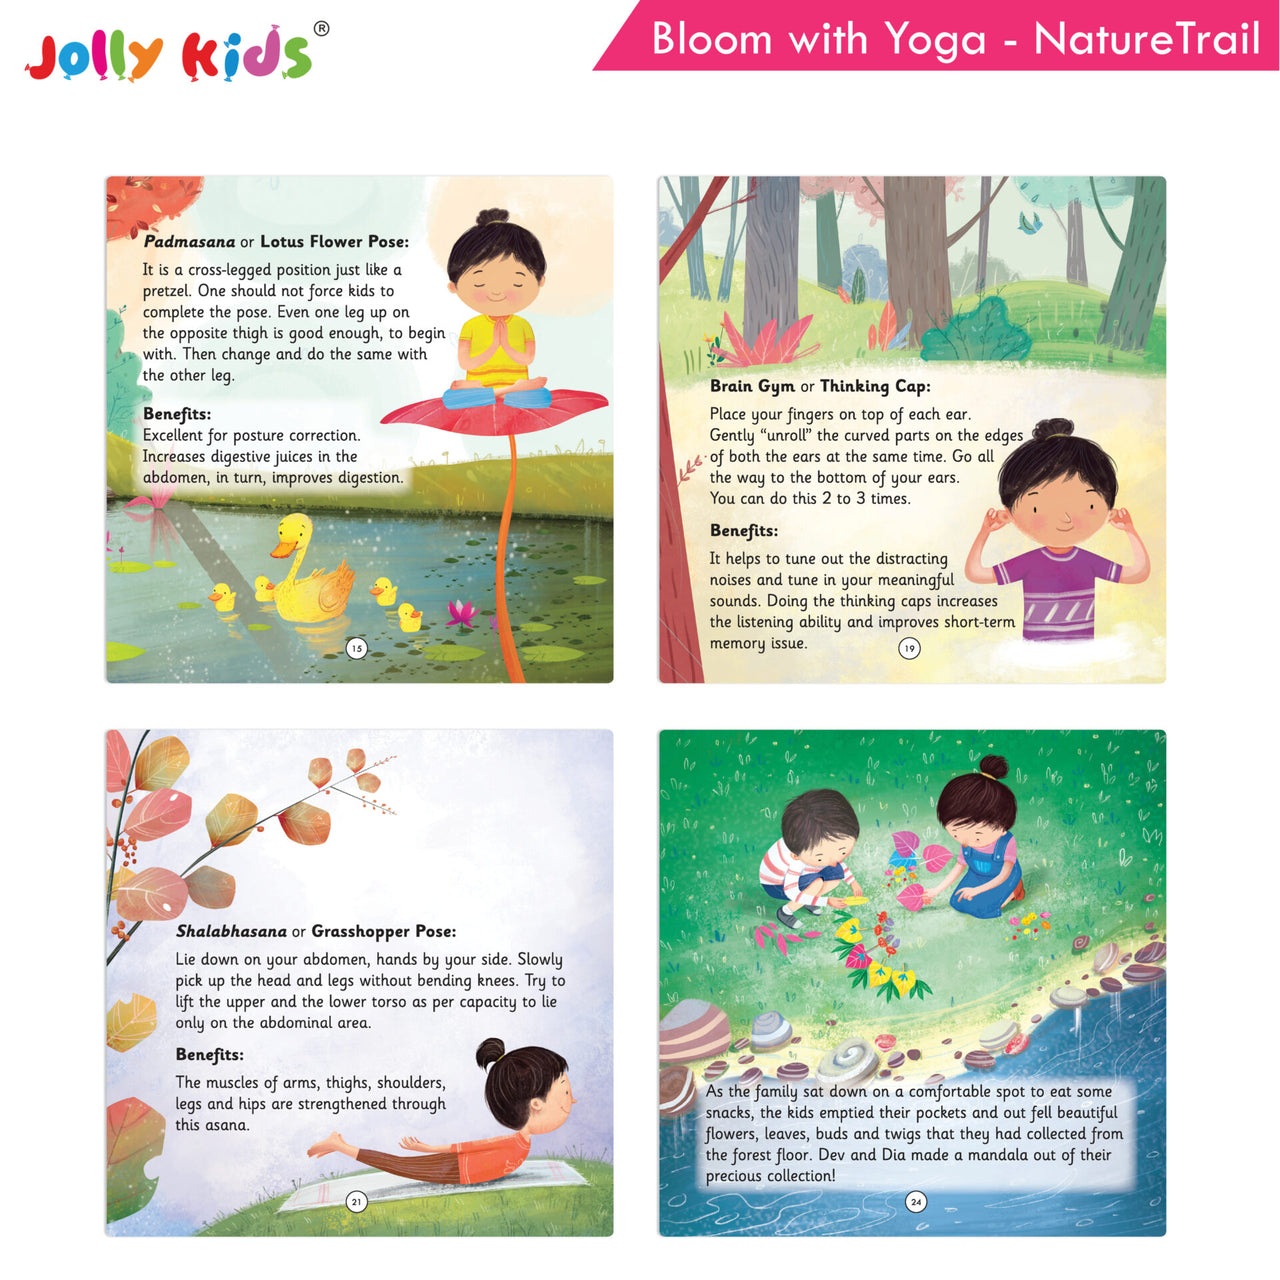 Jolly Kids Bloom With Yoga Books For Kids| Set of 4| Ages 3 - 7 Year| Yoga in Different Places Like Jungle, Beach, Schools, Gardens etc. - Distacart